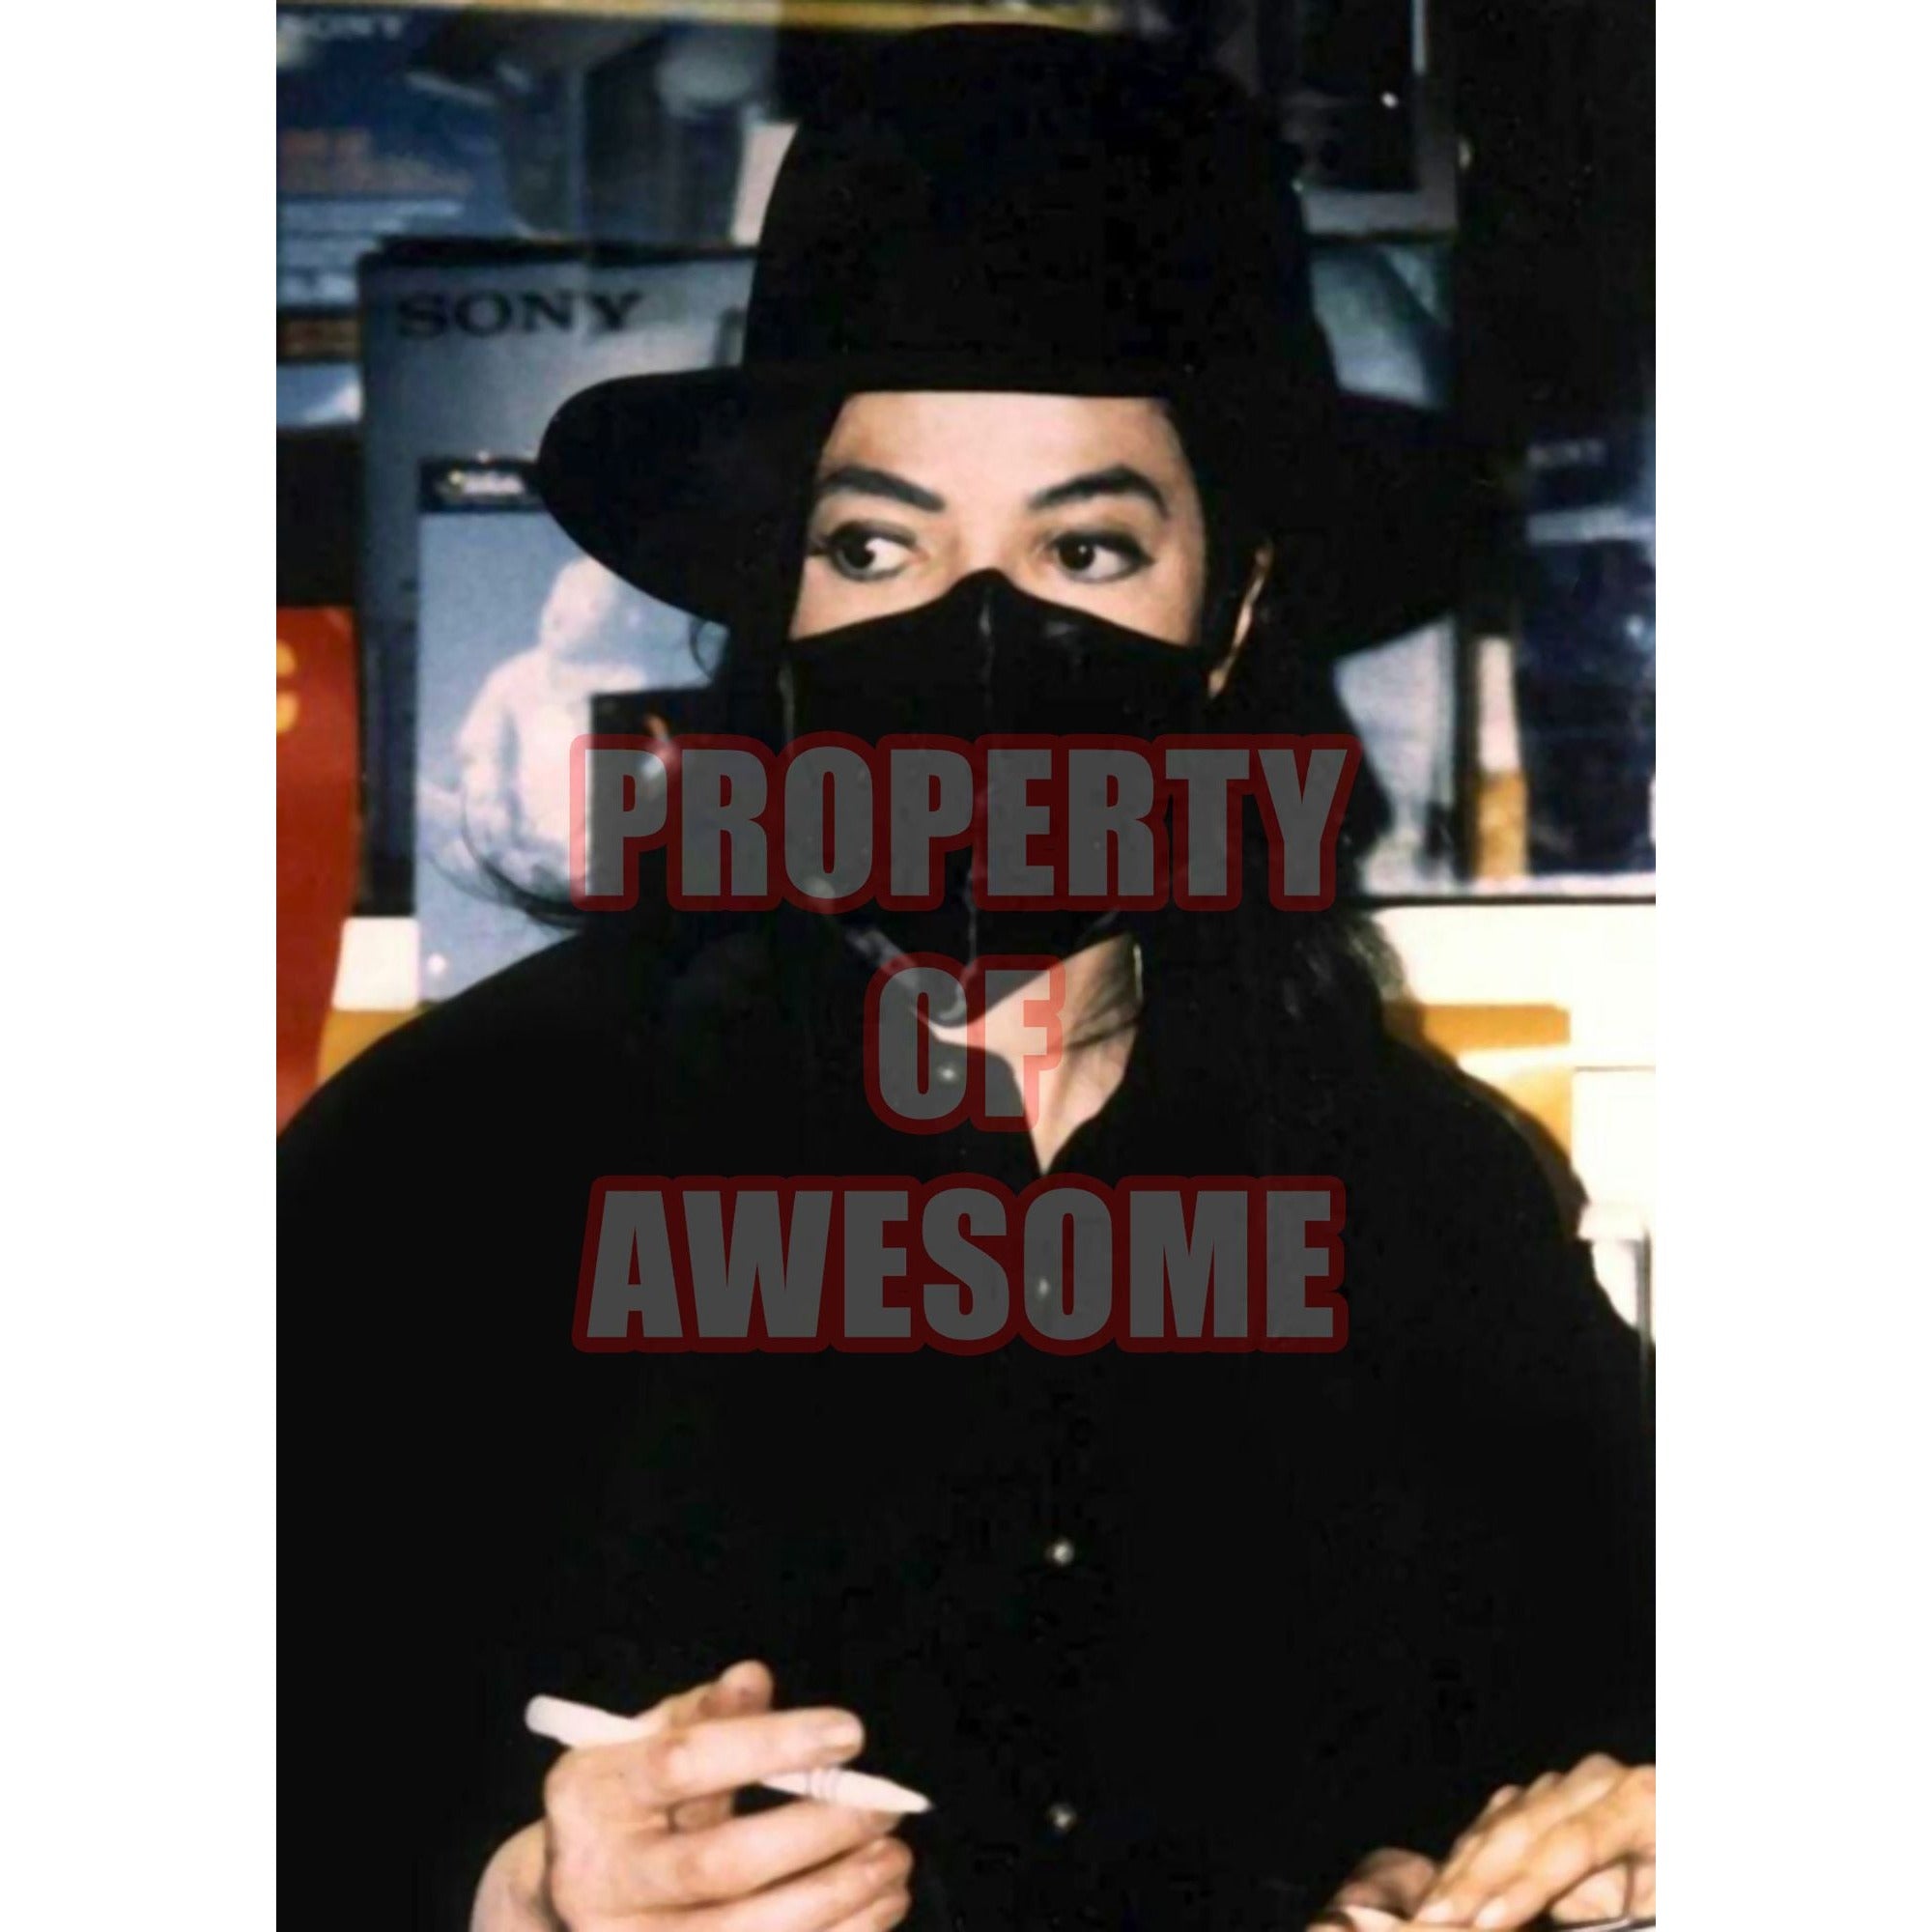 Michael Jackson the King of Pop signed 8x10 photo with proof